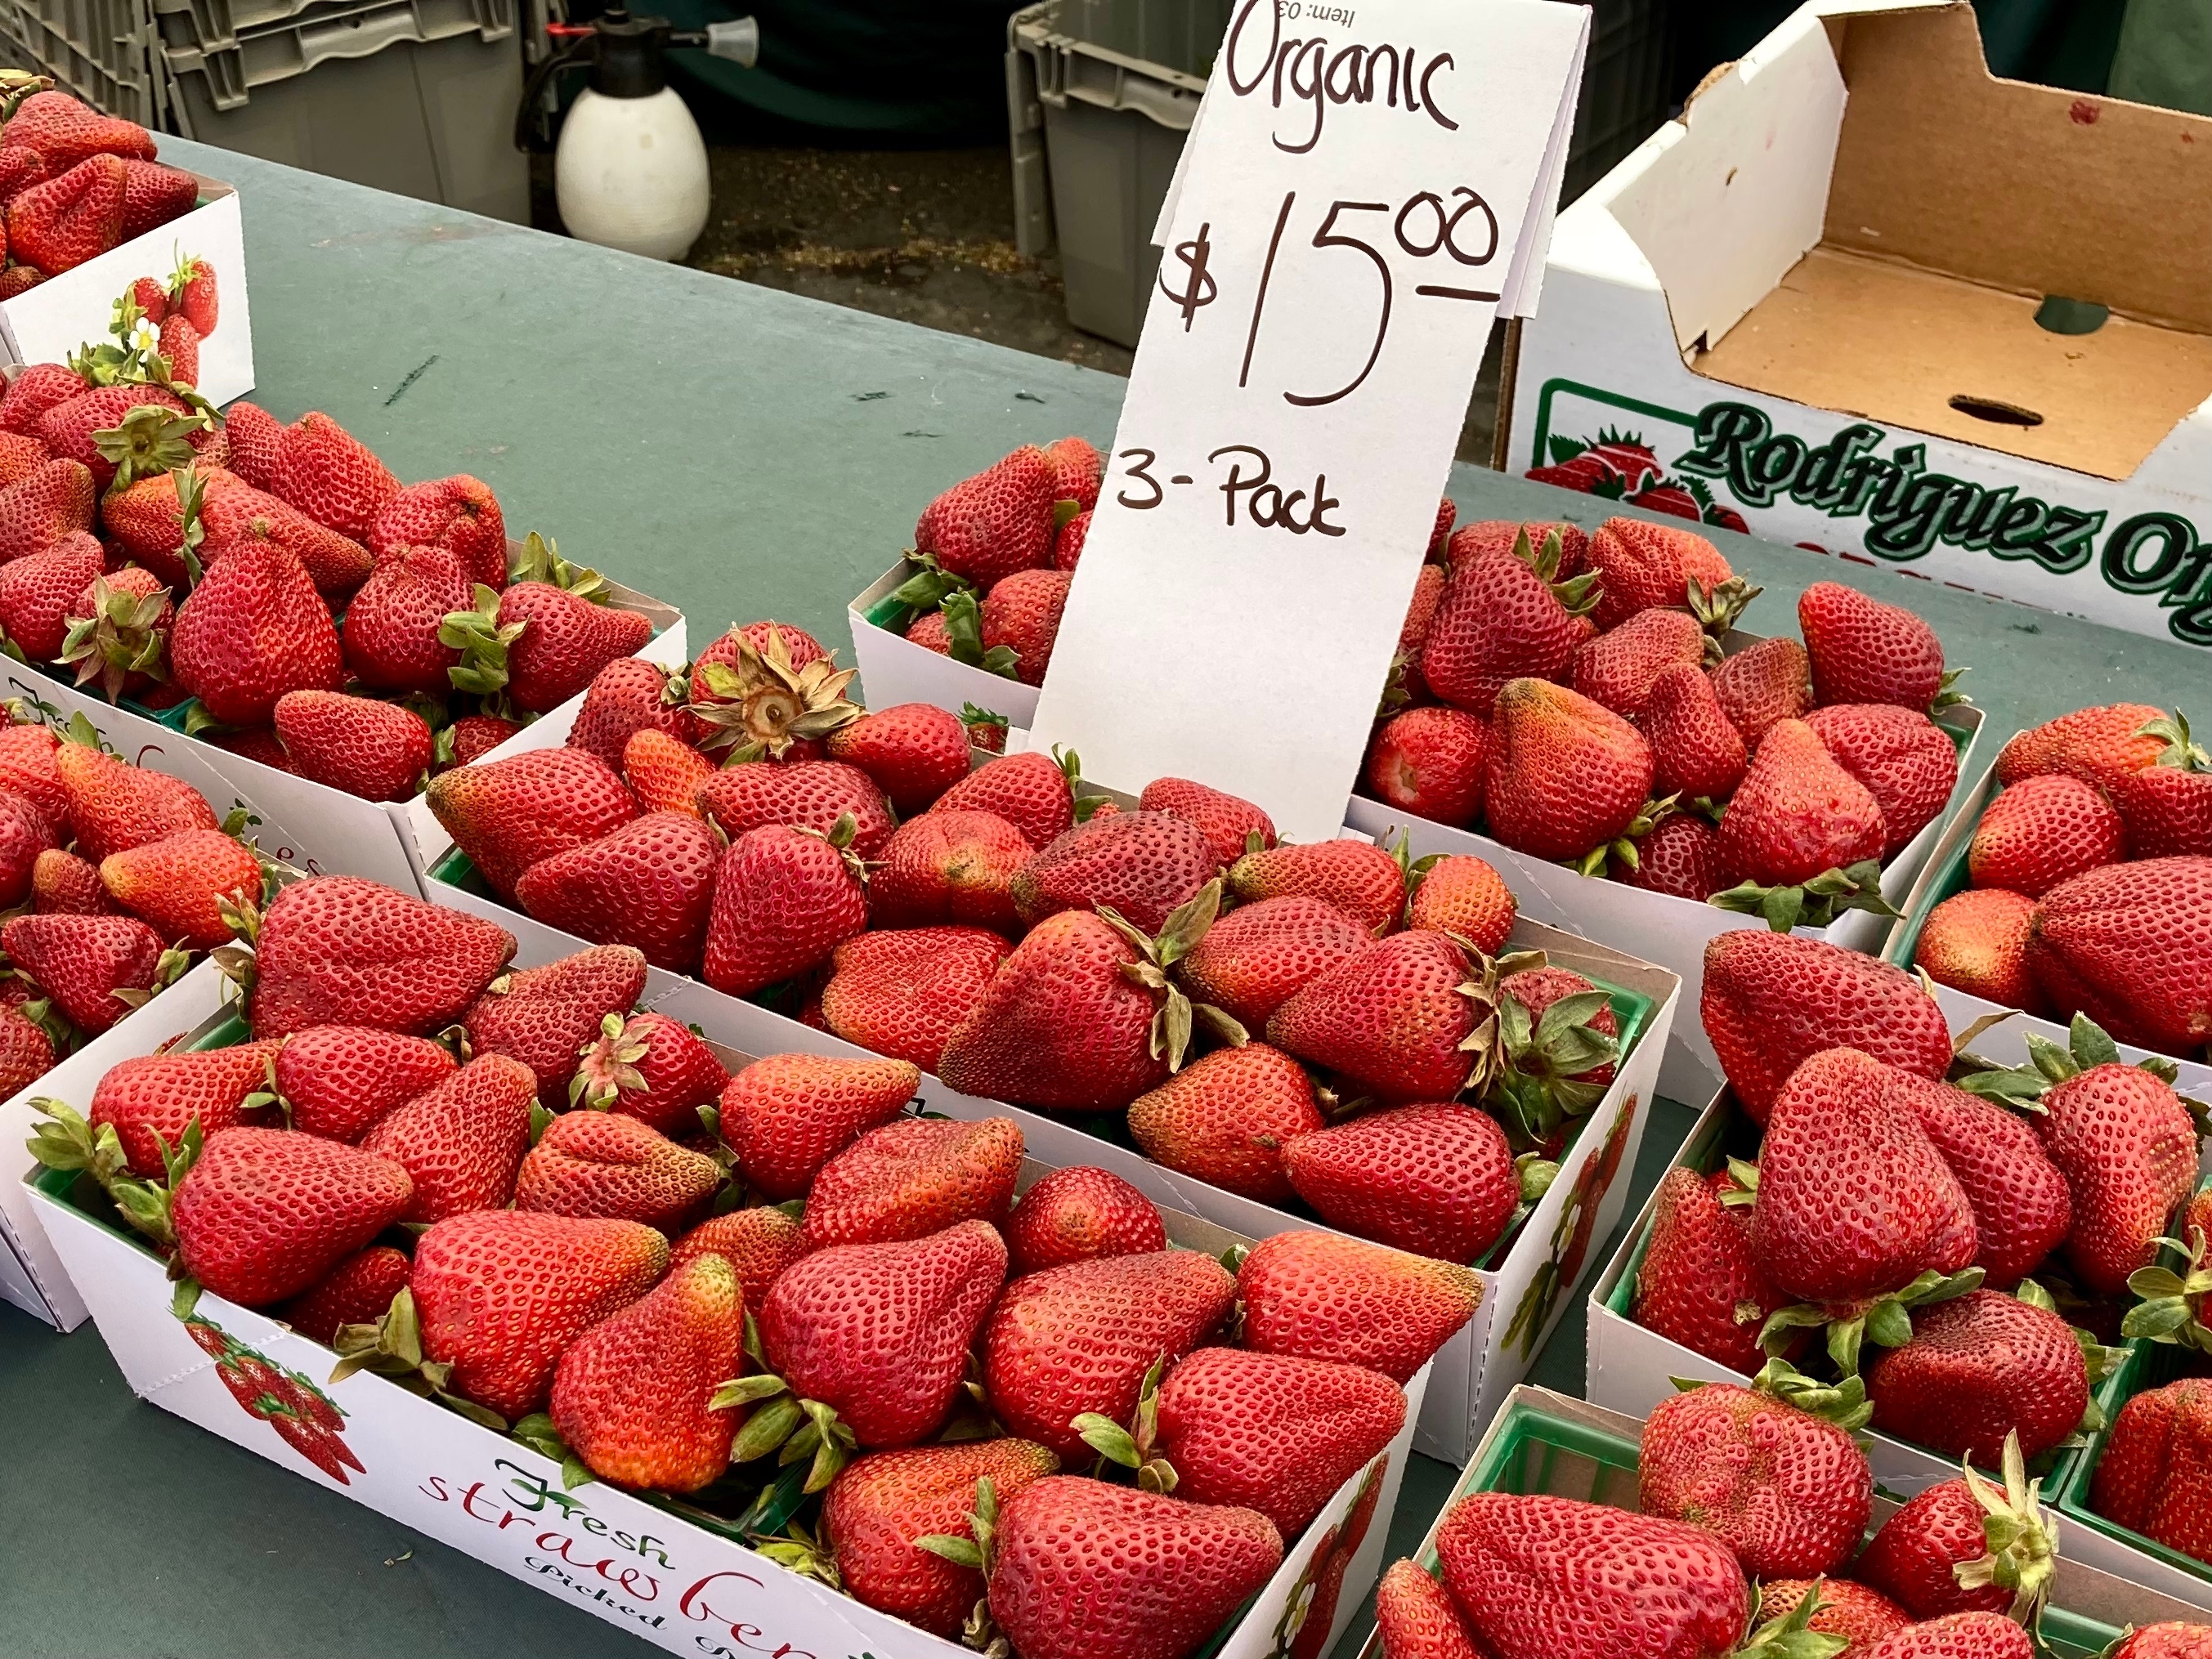 UC study breaks down the costs of growing organic strawberries